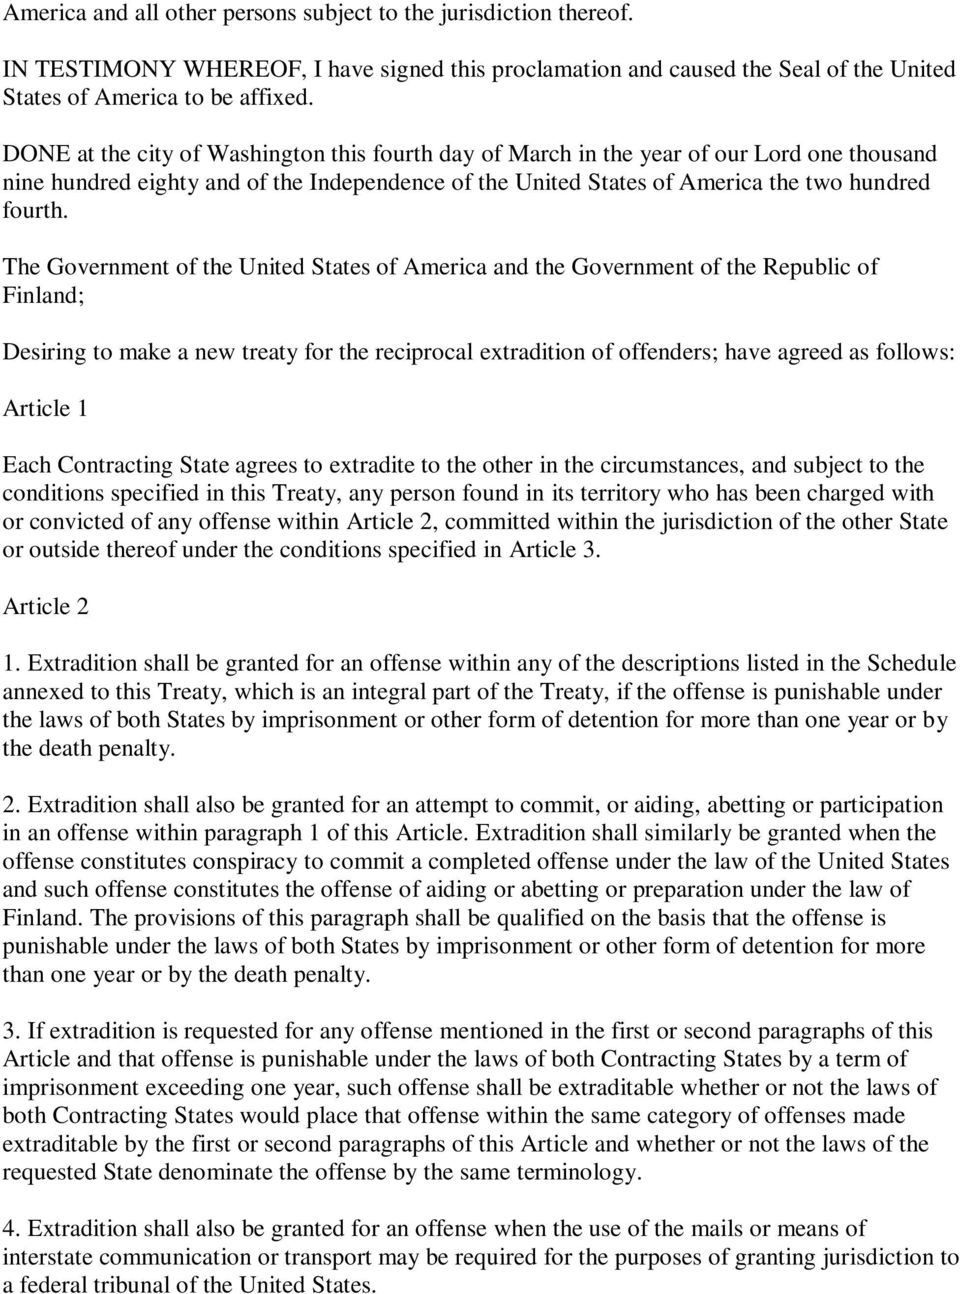 The Government of the United States of America and the Government of the Republic of Finland; Desiring to make a new treaty for the reciprocal extradition of offenders; have agreed as follows: